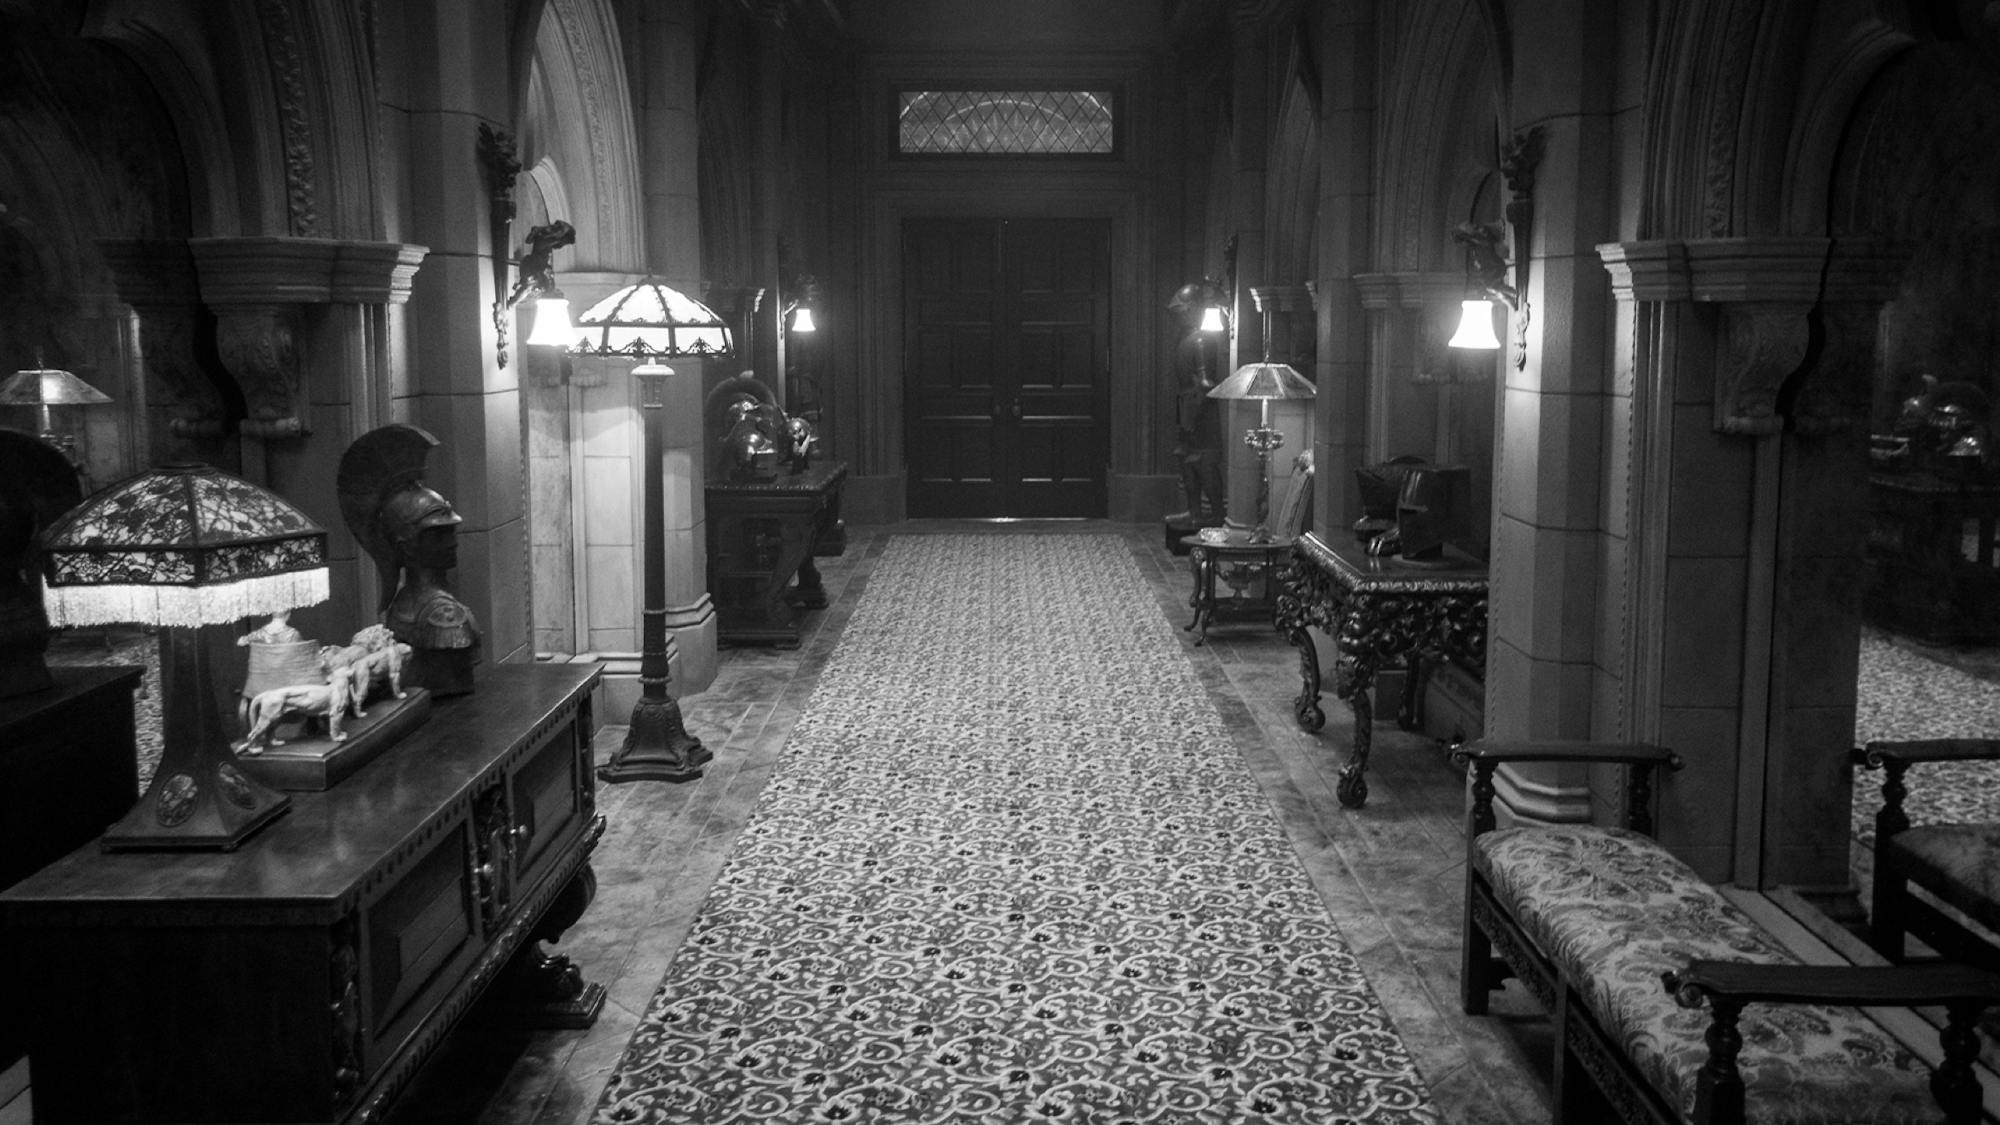 A Hearst Castle interior set includes a long hallway featuring an equally long, intricately patterned runner. The passage is built from large stones and ends in a set of double doors. The sides of the hall are lined with dark wood tables, upholstered benches, and an assortment of table, standing, and mounted lamps. 